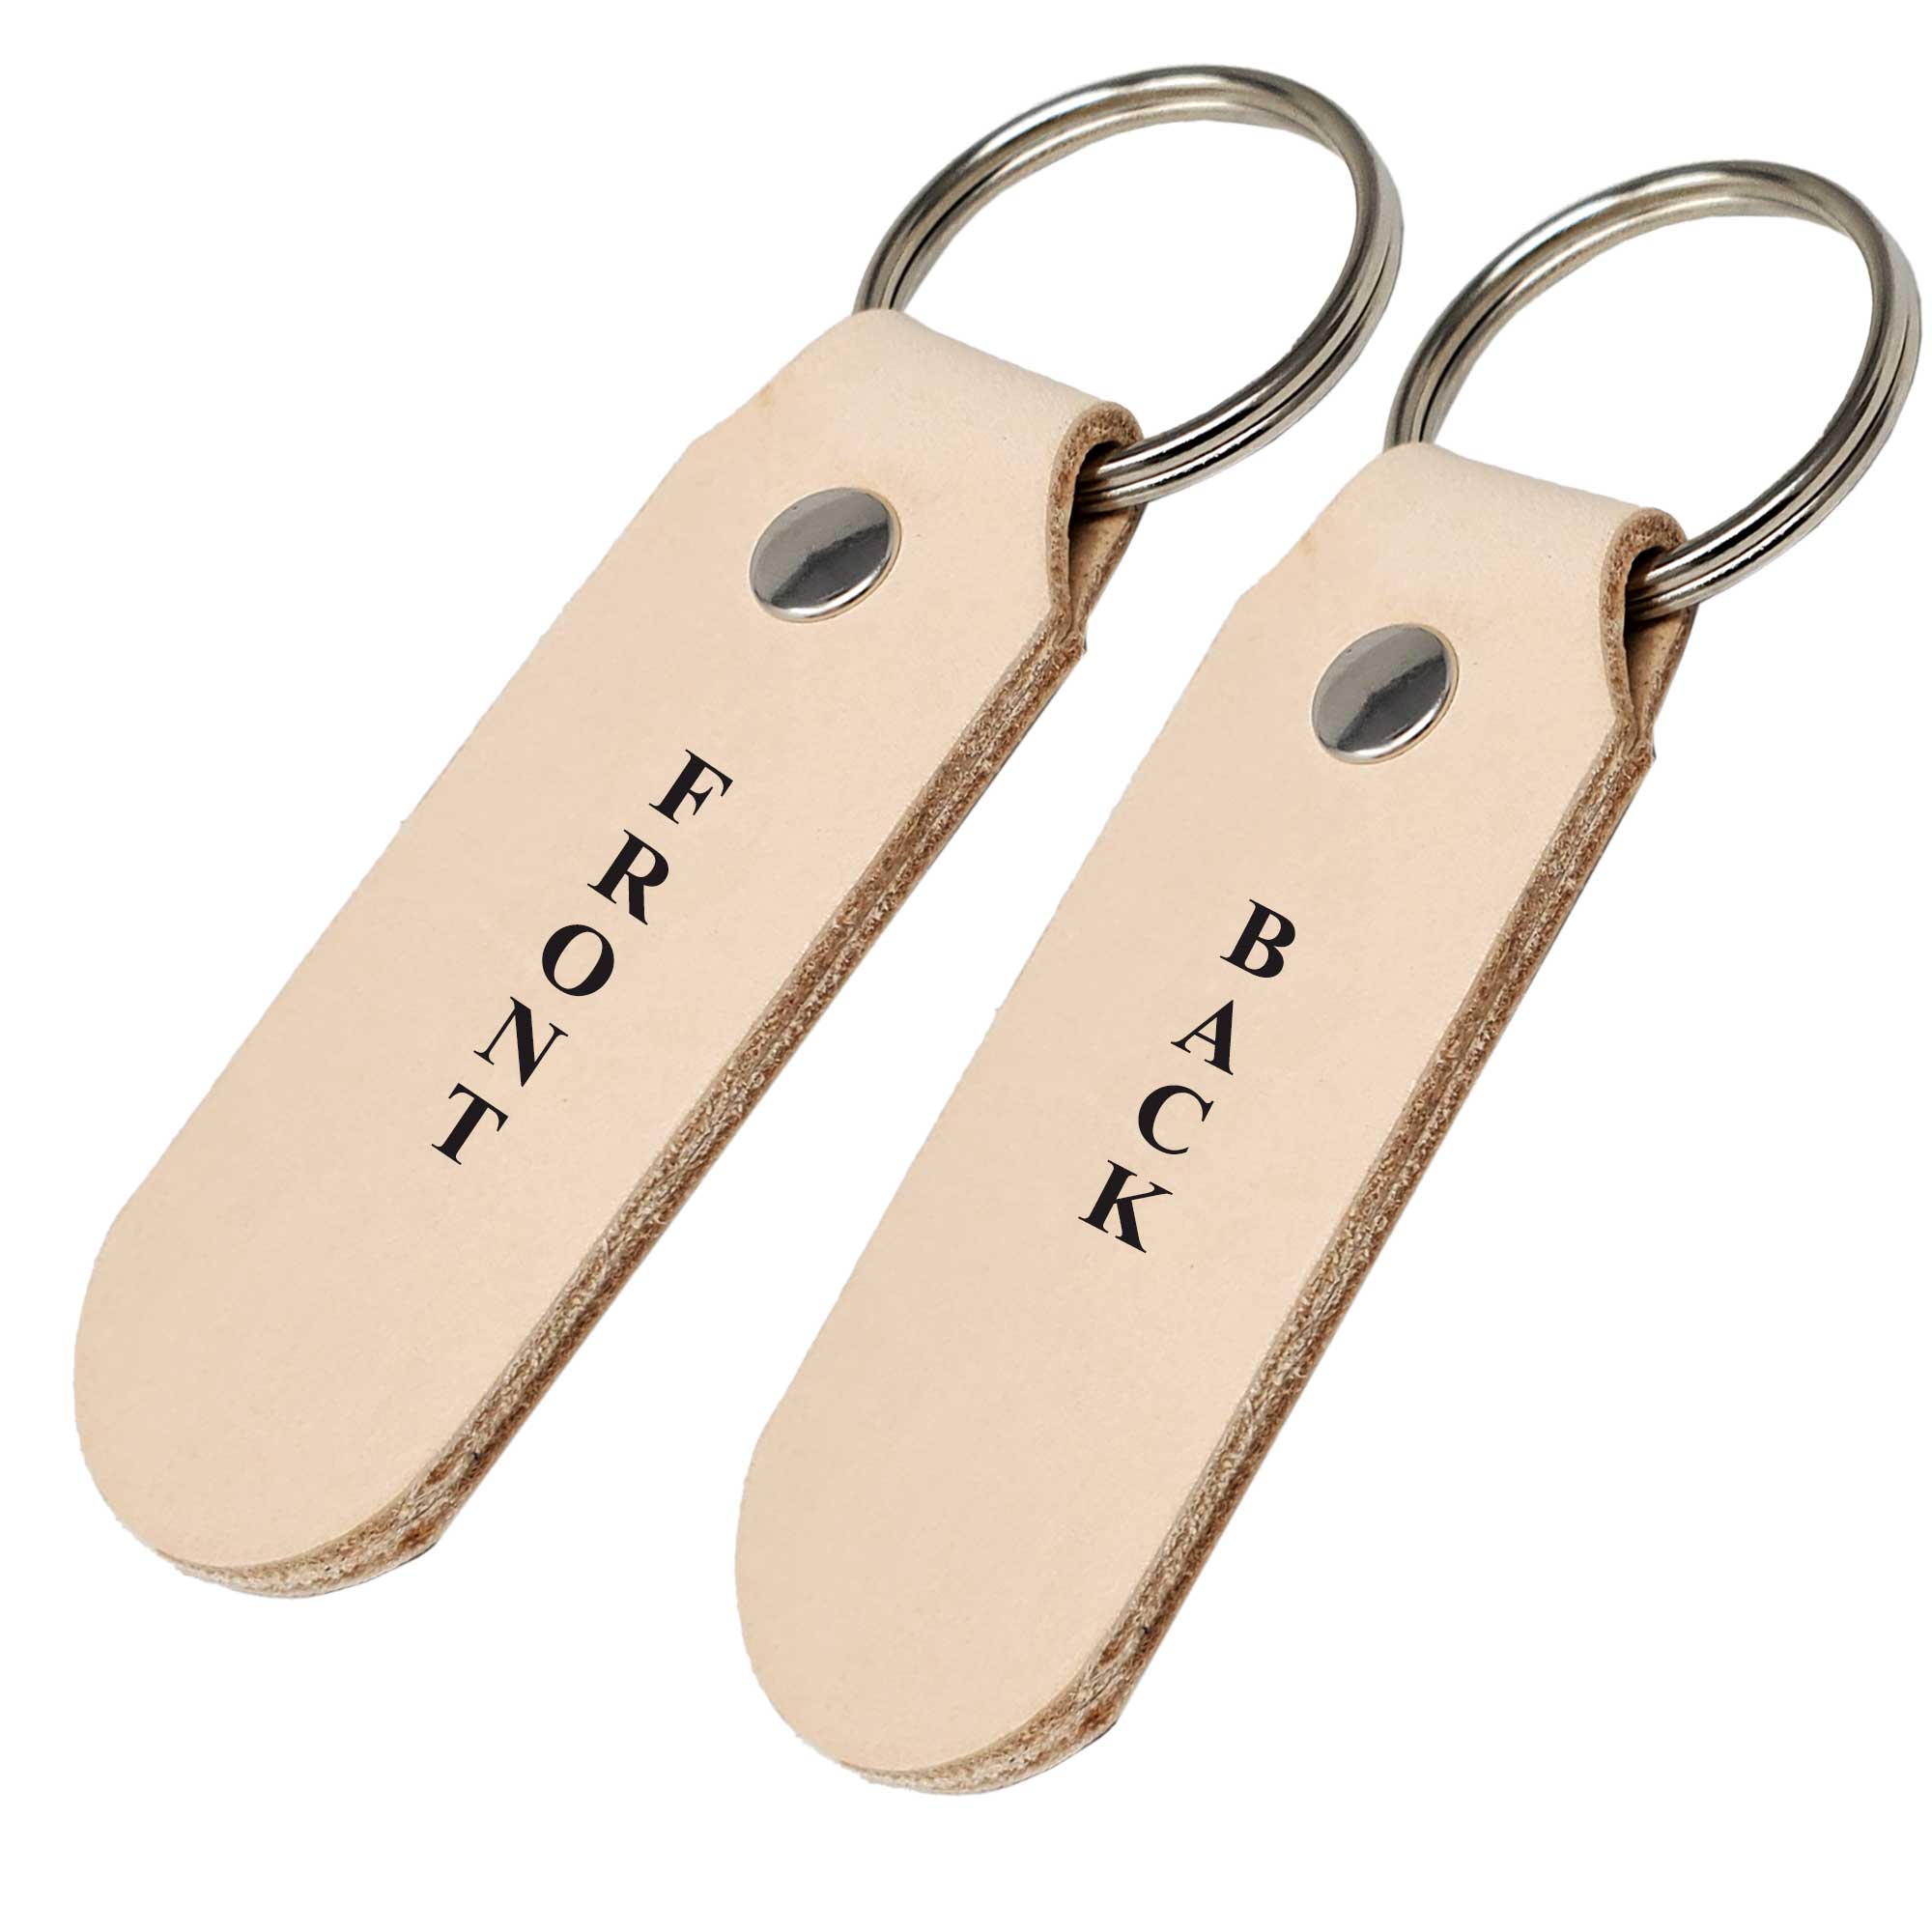 Pitka Leather Full Grain Leather Key Chain Engraving Ready | 10 Packs Blank Leather Keyrings | Choose One Color or Mixed | Laser Engraving, Hot and Foil Stamping